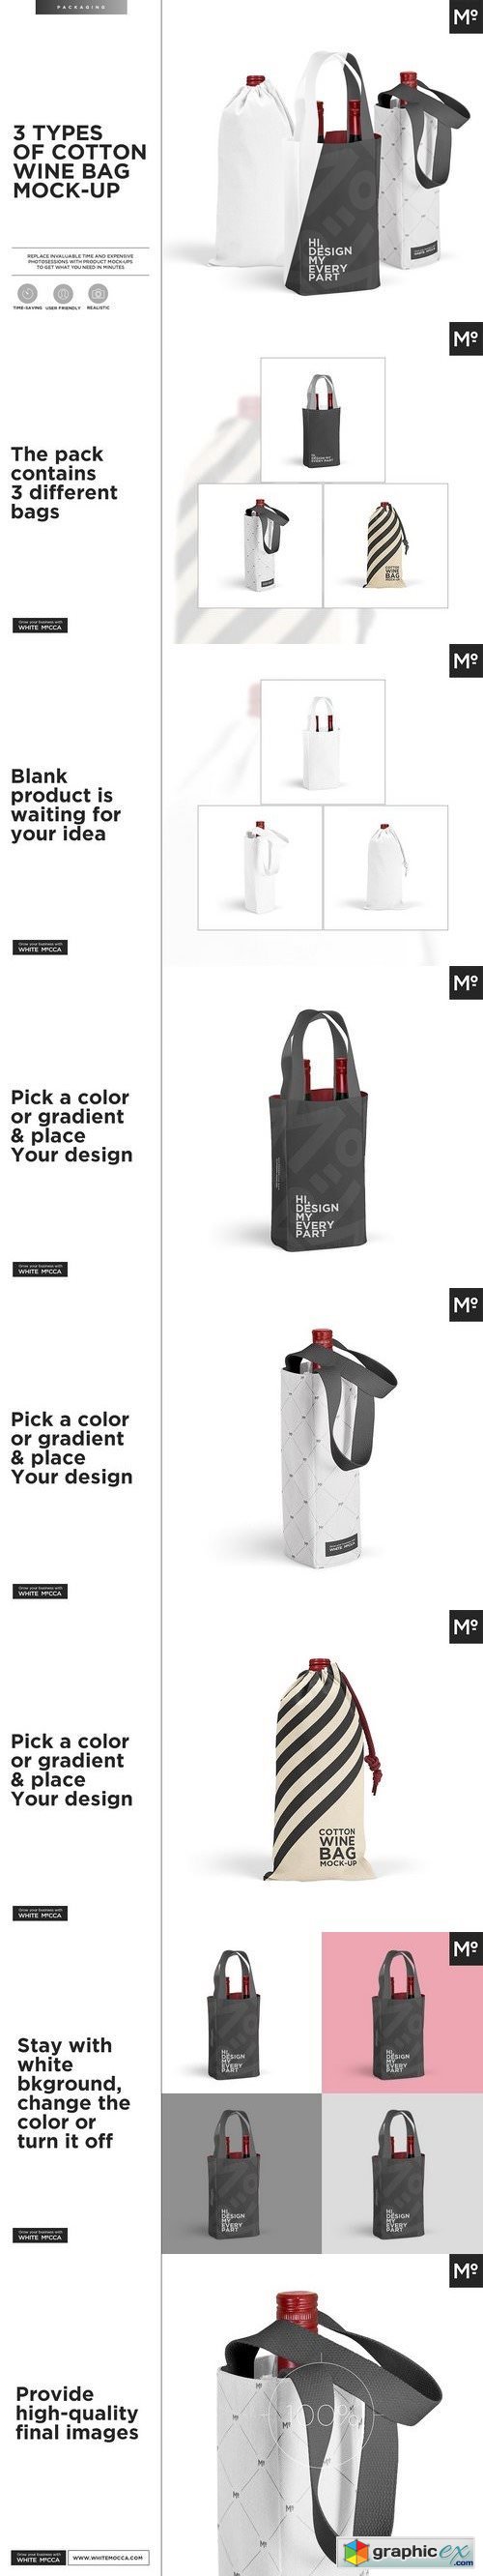 Cotton Wine Bags 3 Types Mock-up